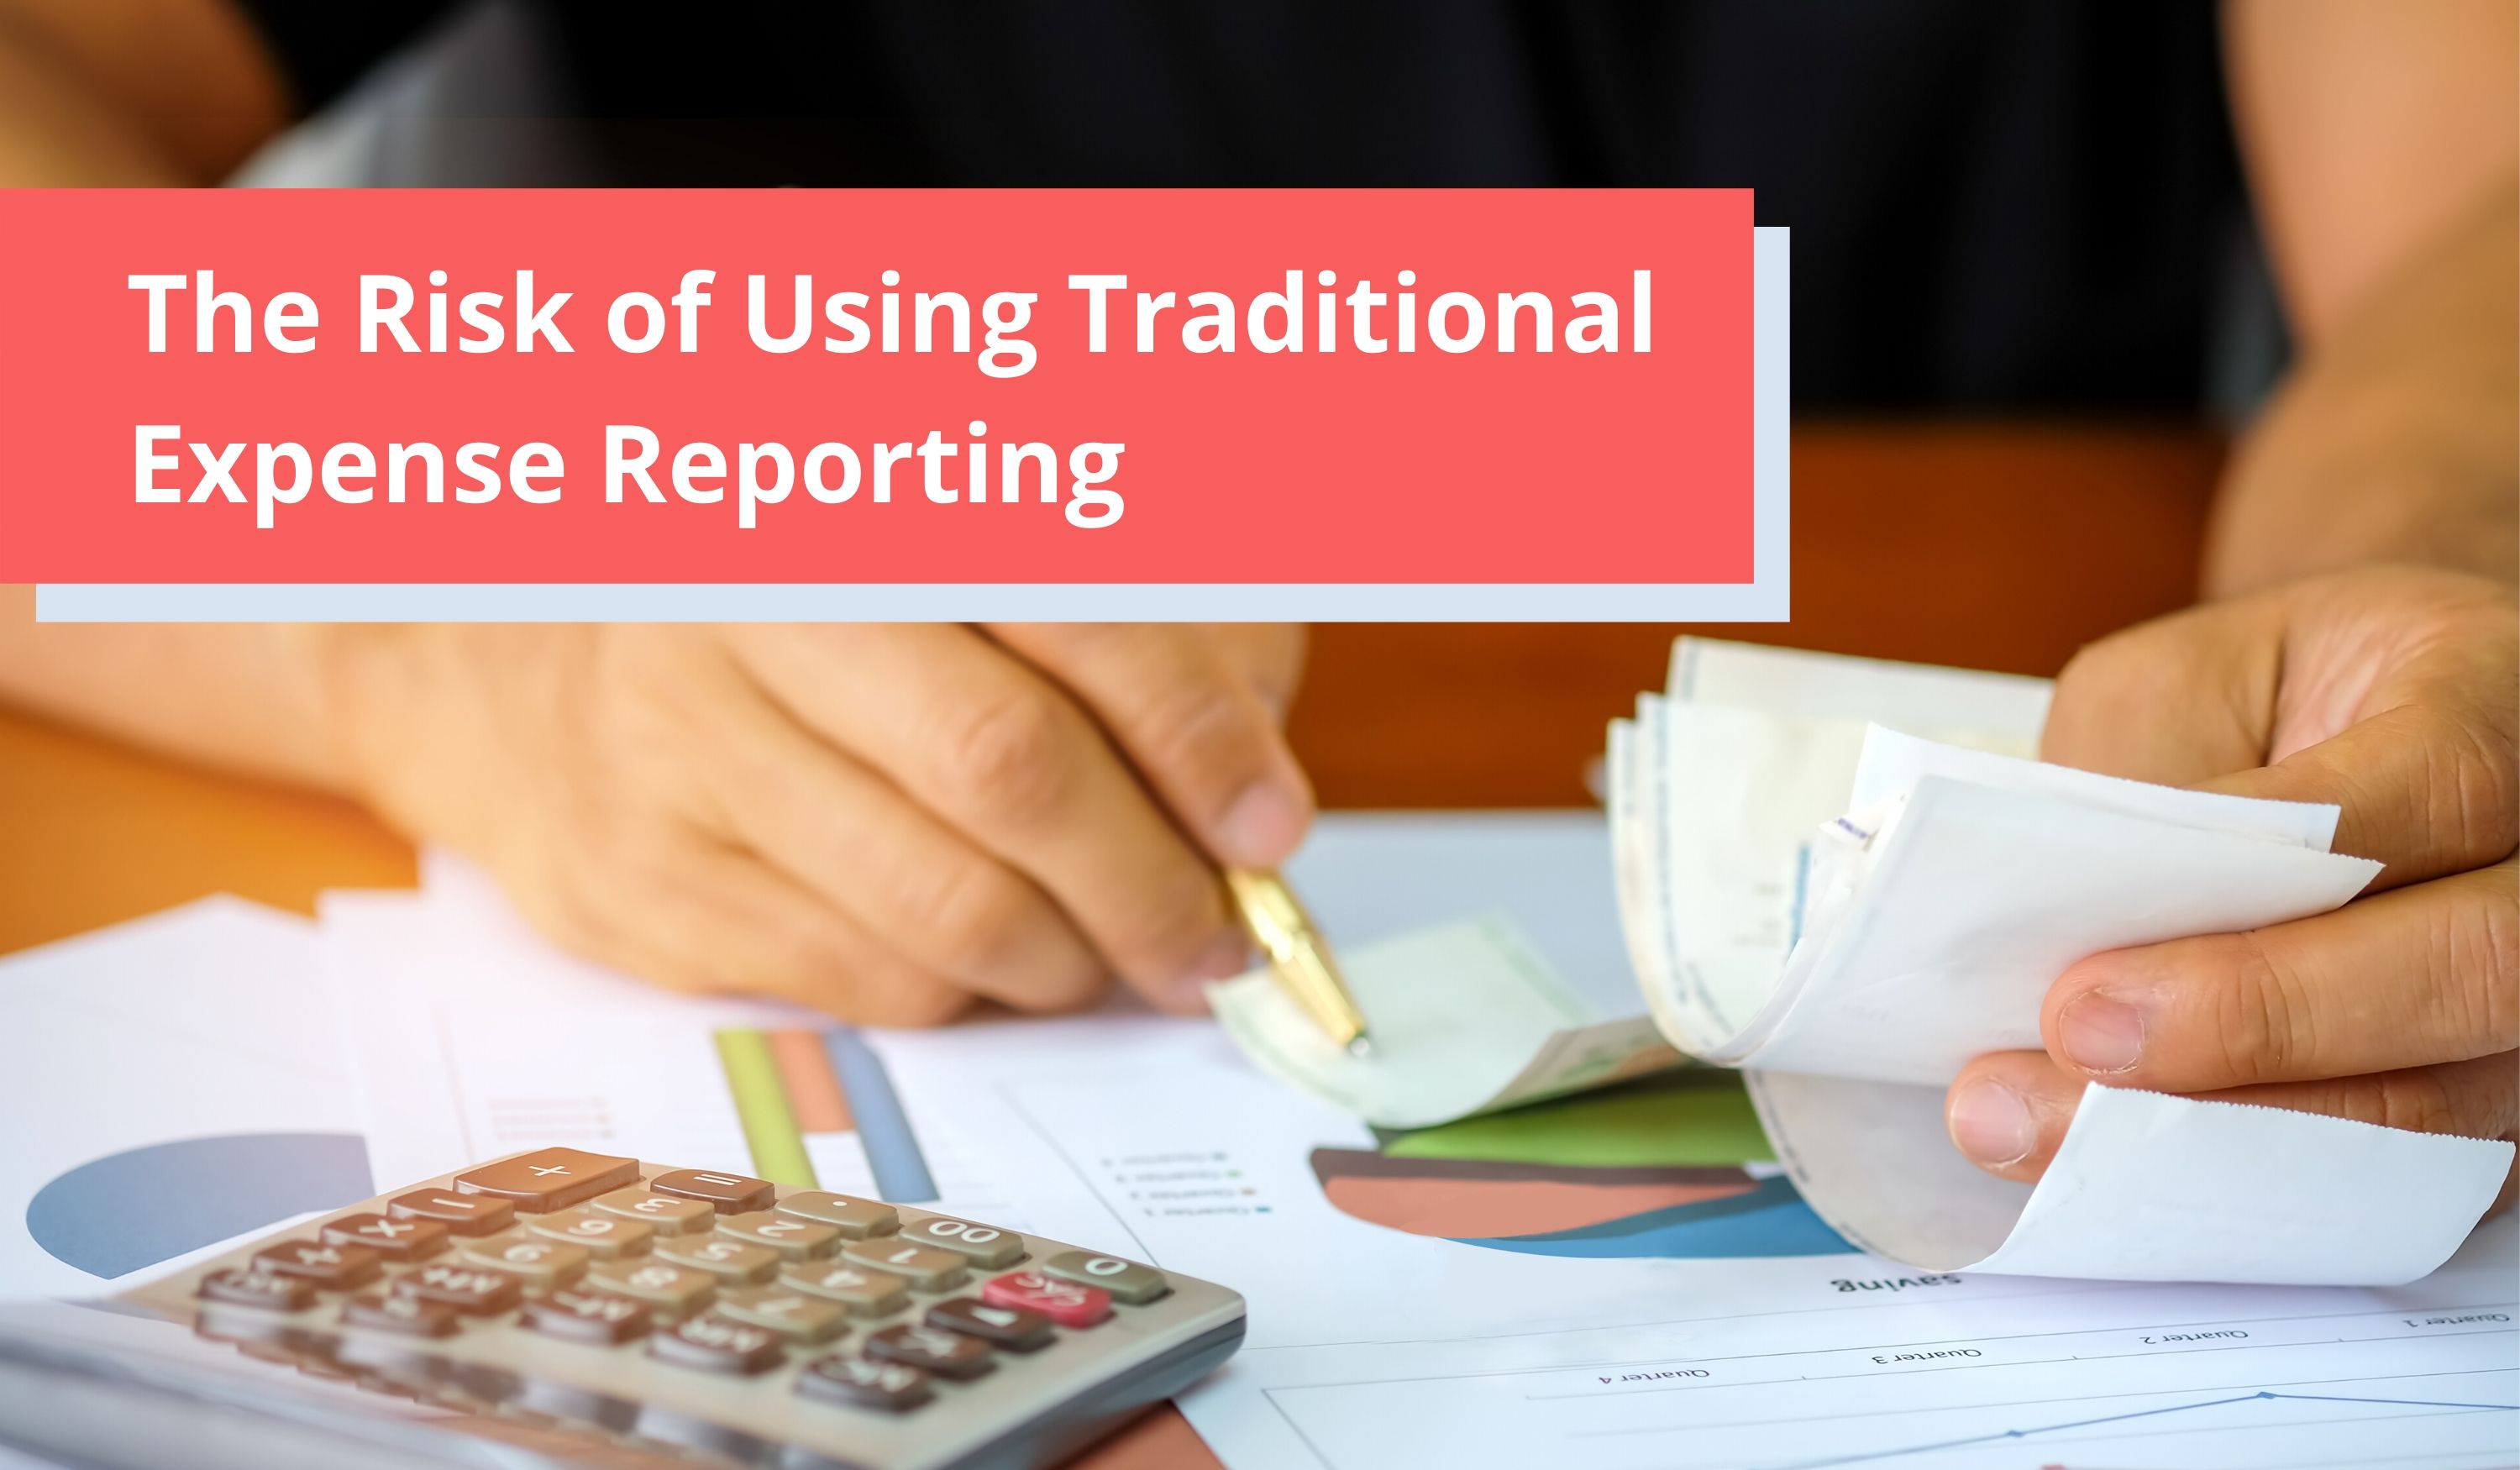 The Risk of Using Traditional Expense Reporting